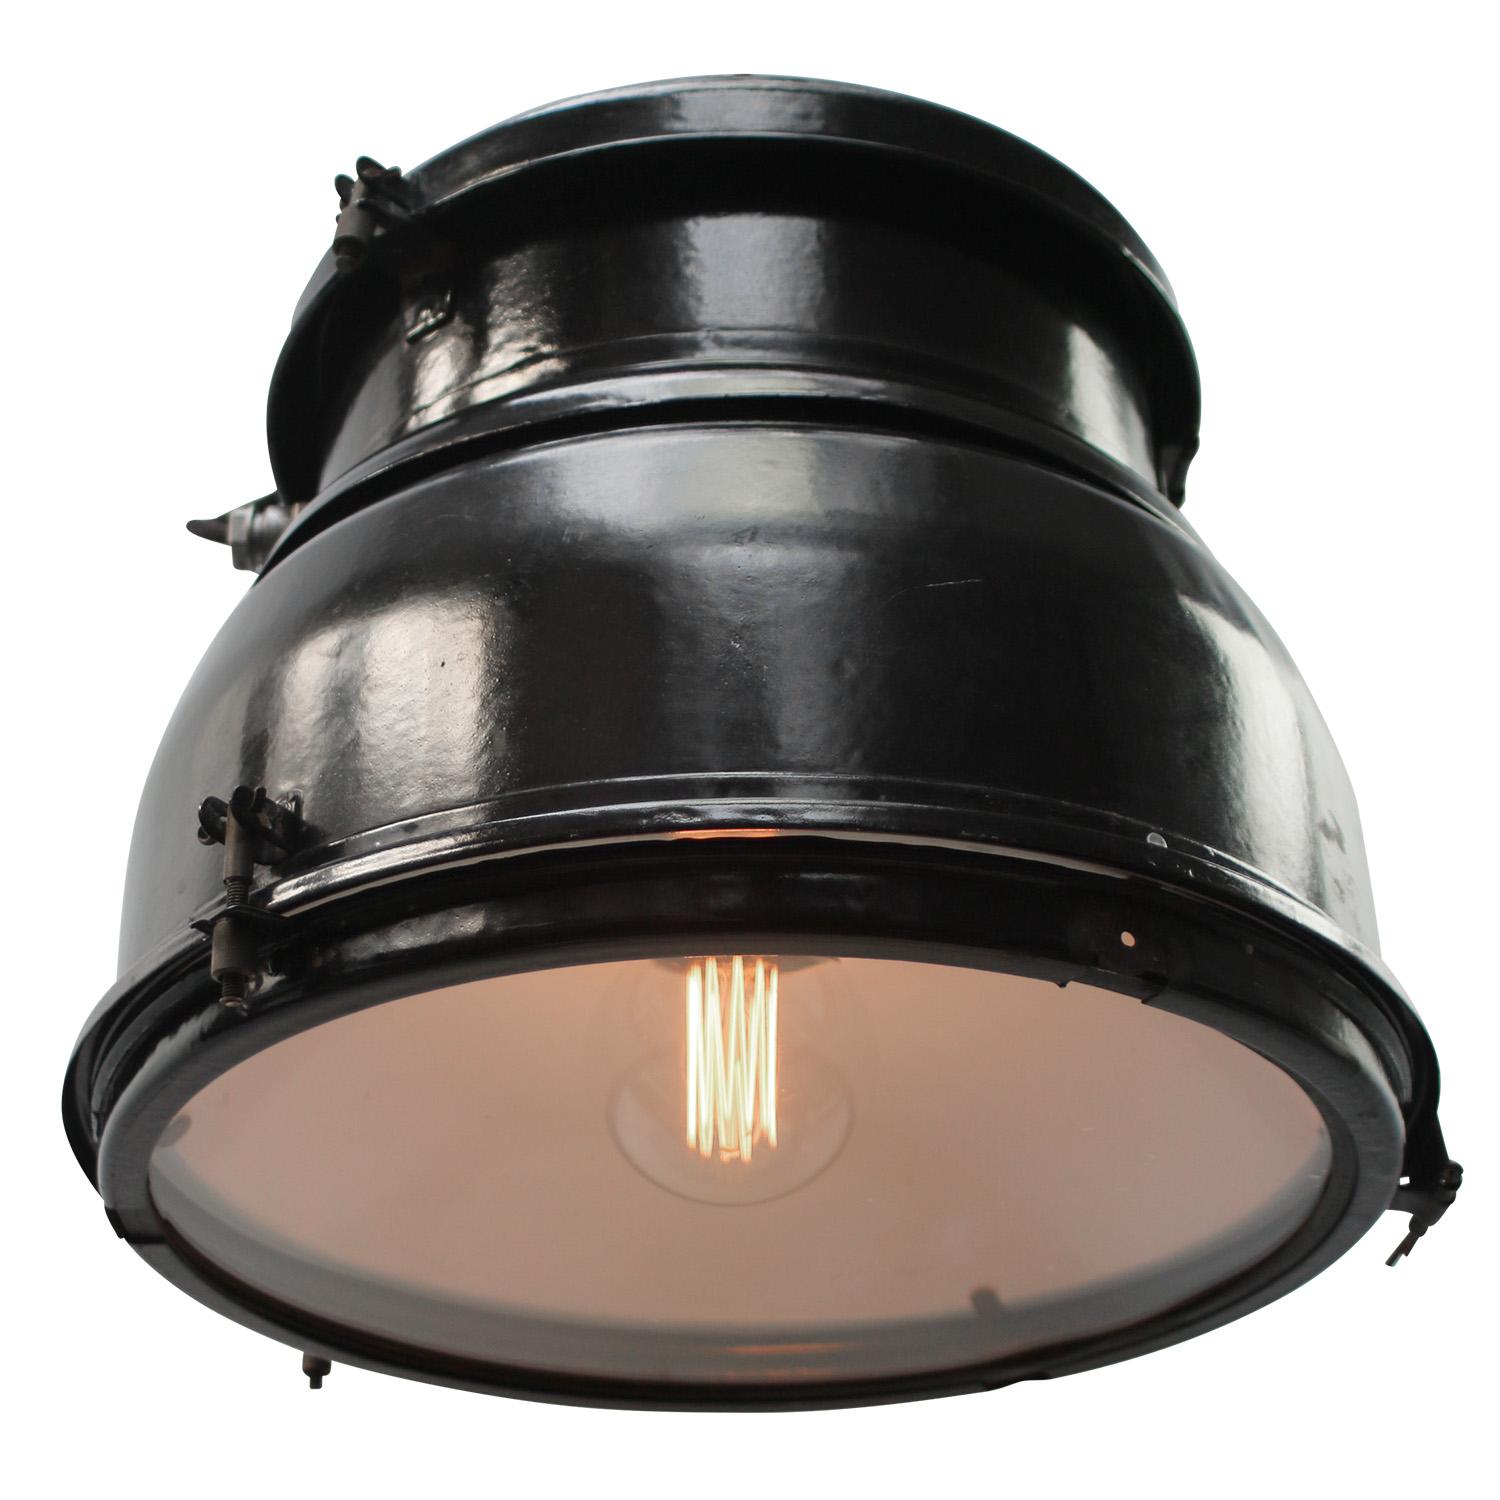 Factory hanging light
Black enamel dark interior
clear glass

Weight: 8.9 kg / 19.6 lb.

Priced per individual item. All lamps have been made suitable by international standards for incandescent light bulbs, energy-efficient and LED bulbs. E26/E27